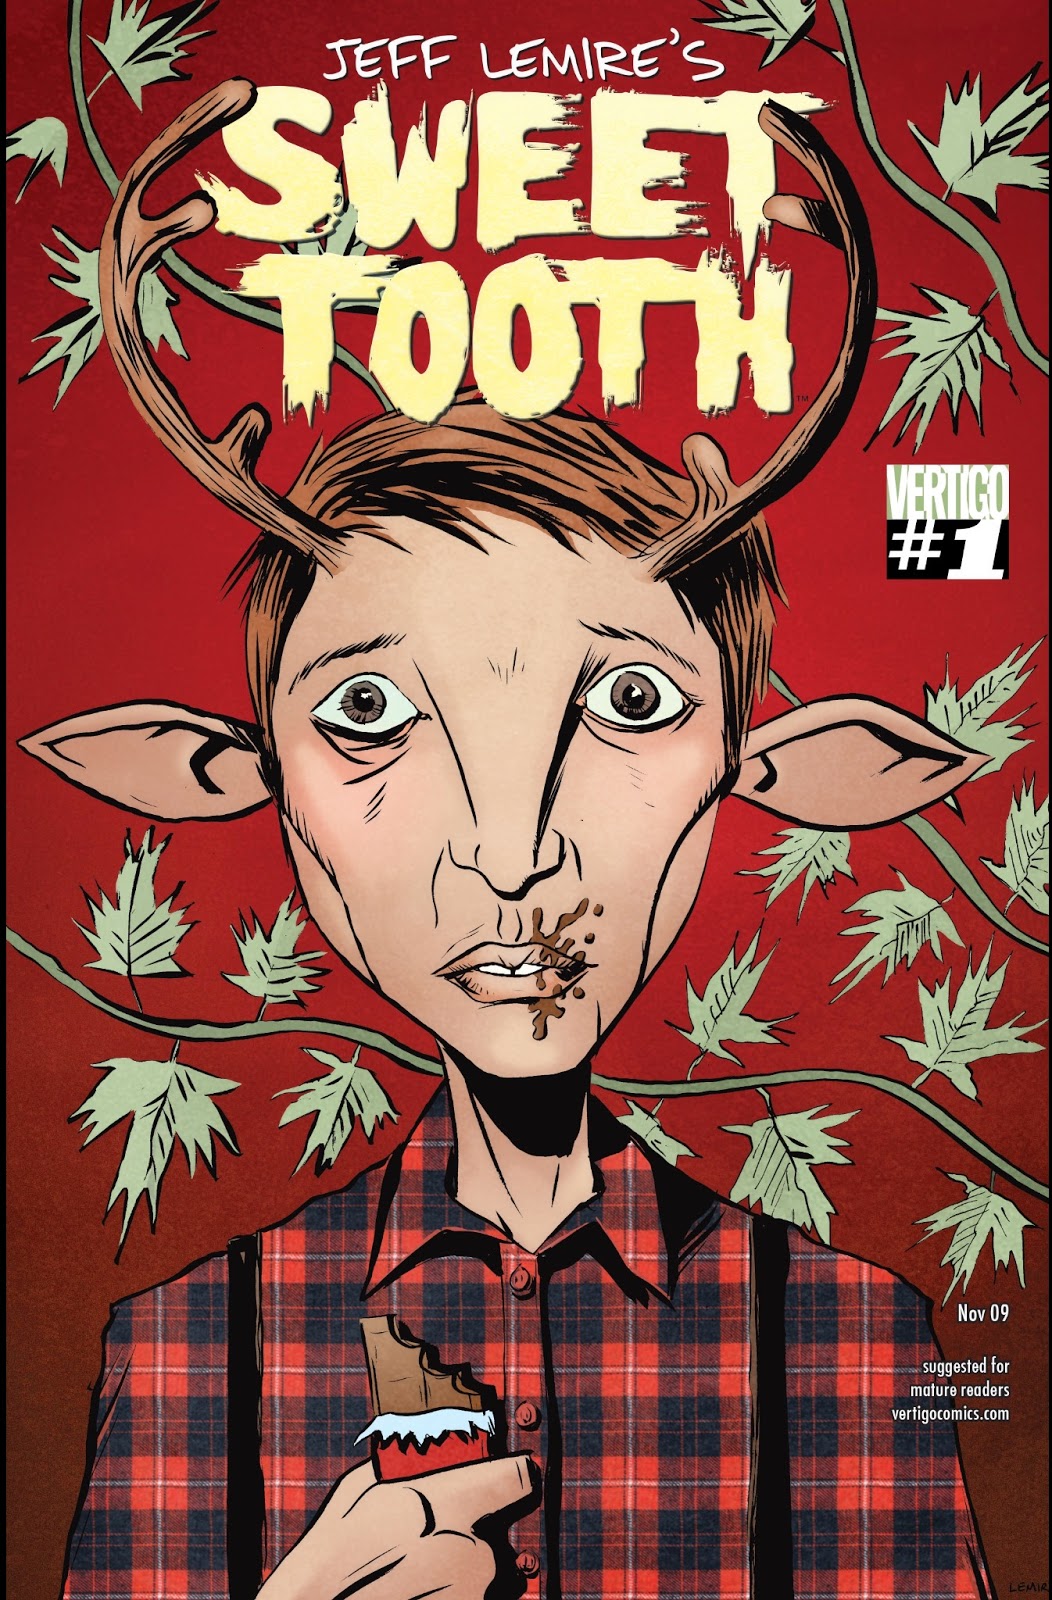 Sweet Tooth by Jeff Lemire